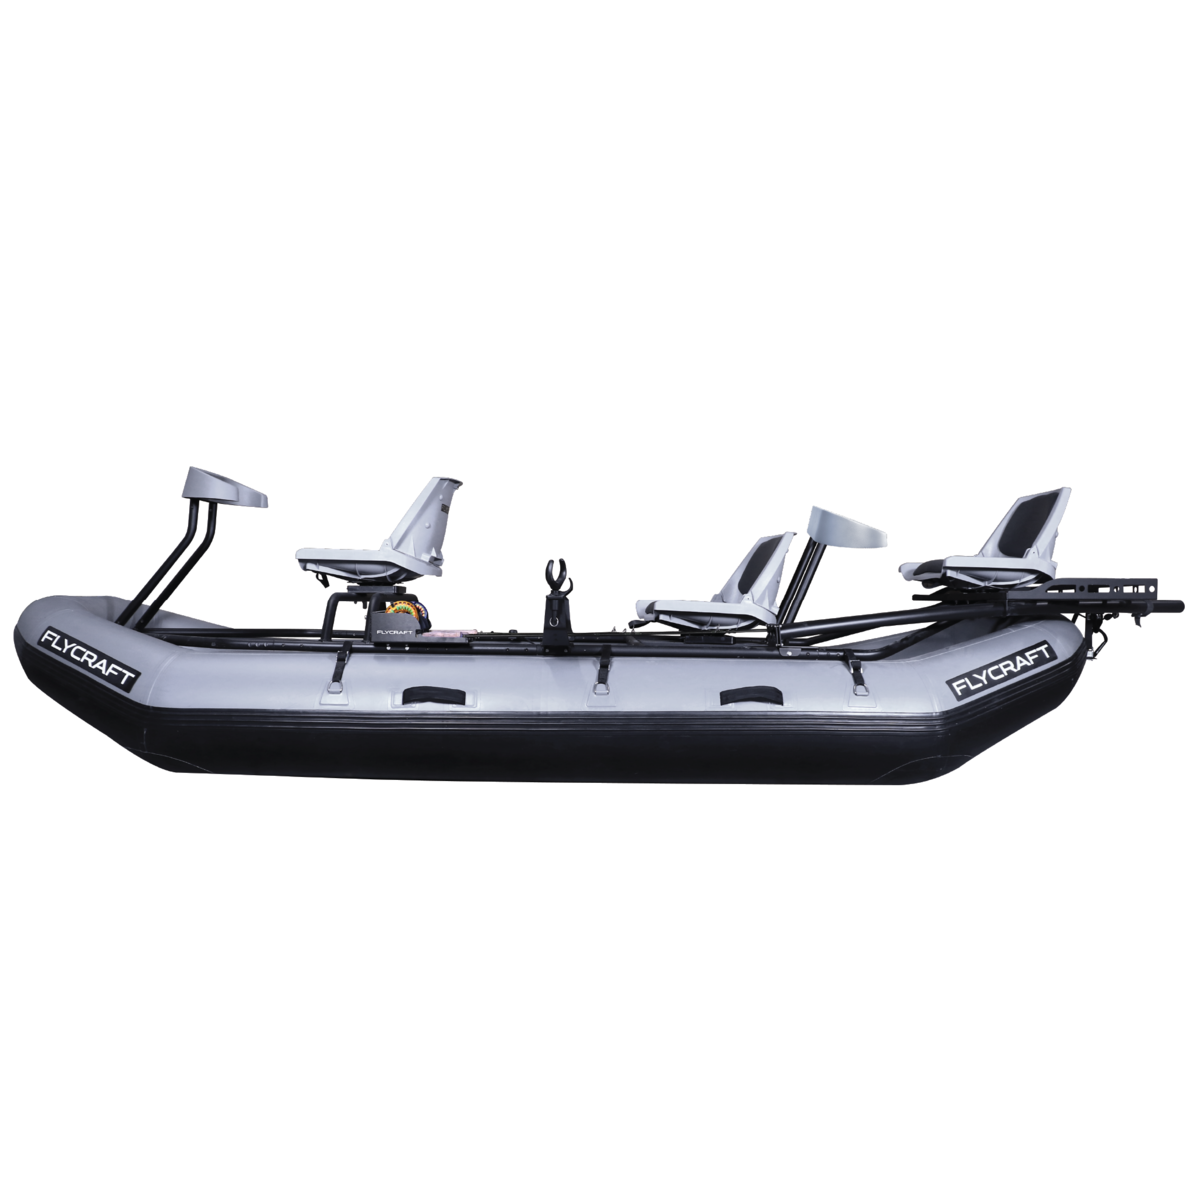 stealth x inflatable drift boat - FLYCRAFT USA